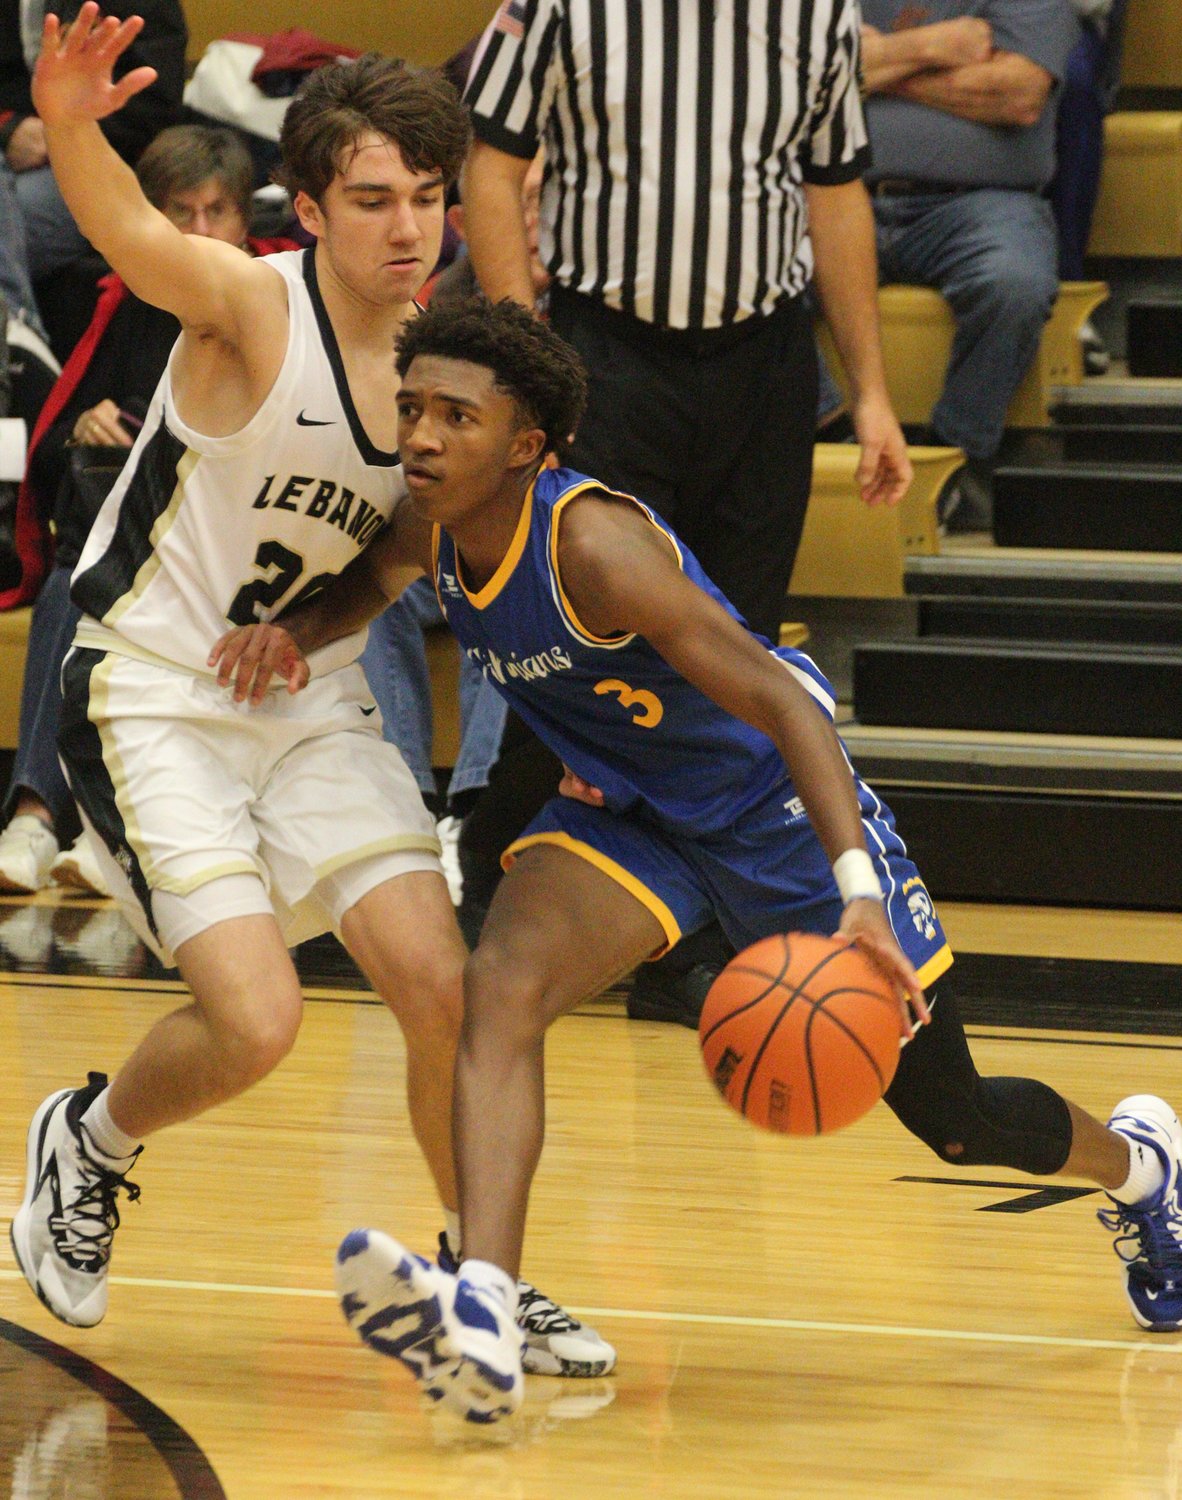 Ziair Morgan dropped a game-high 23 points for Crawfordsville in their 53-48 loss to Lebanon.